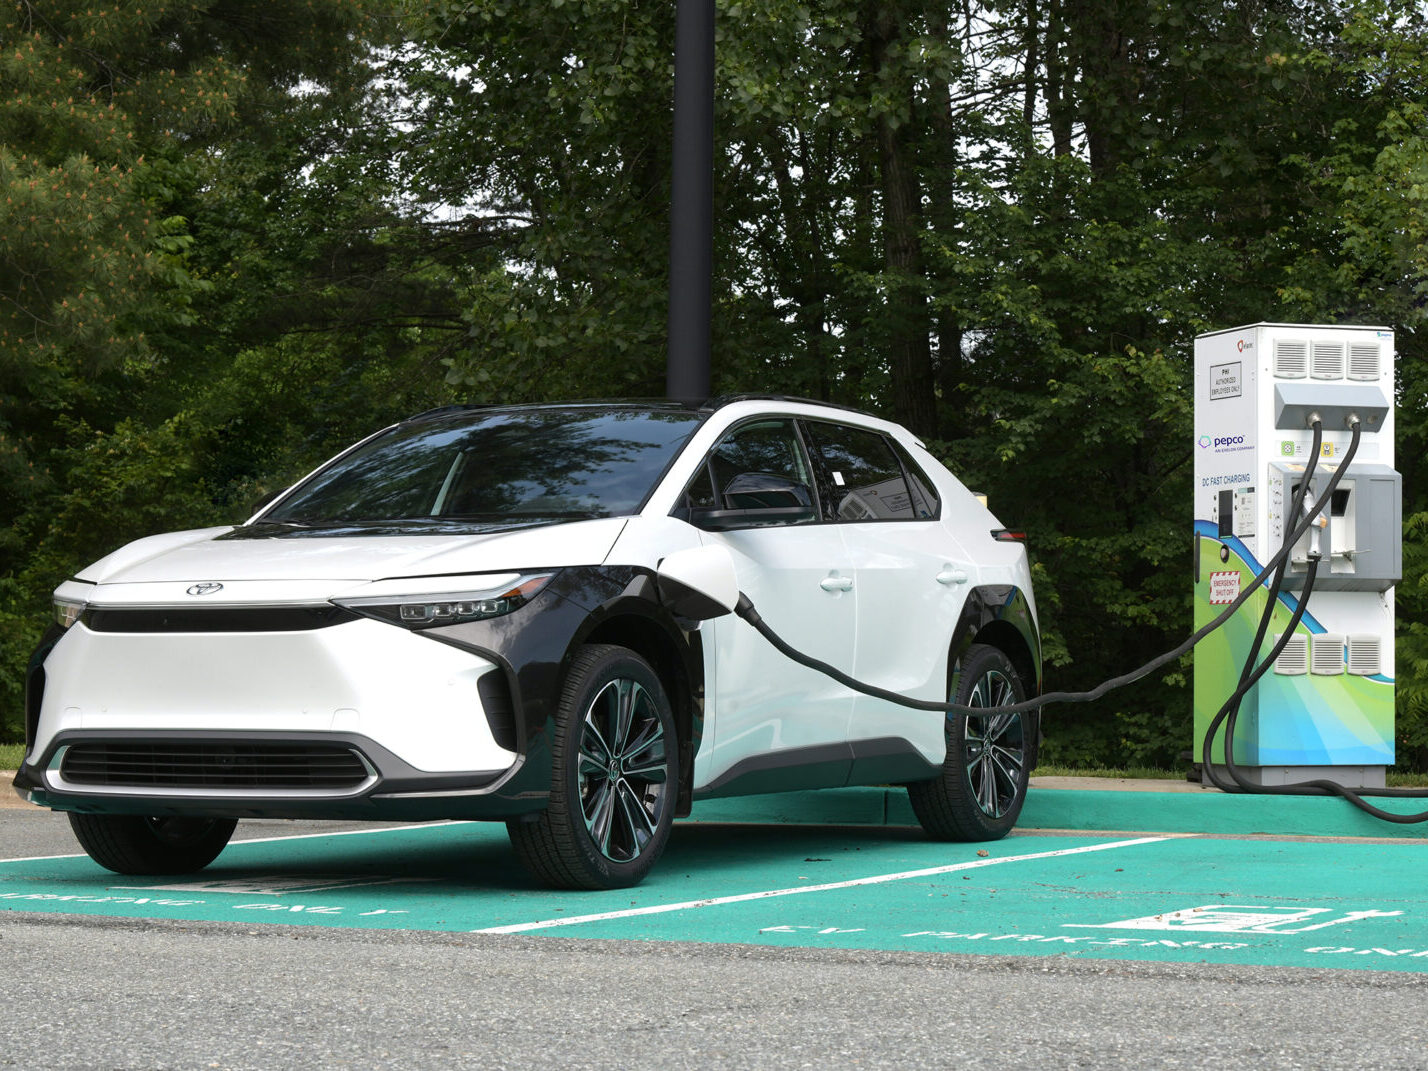 US: Toyota and Pepco to Research Vehicle-to-Grid Technology